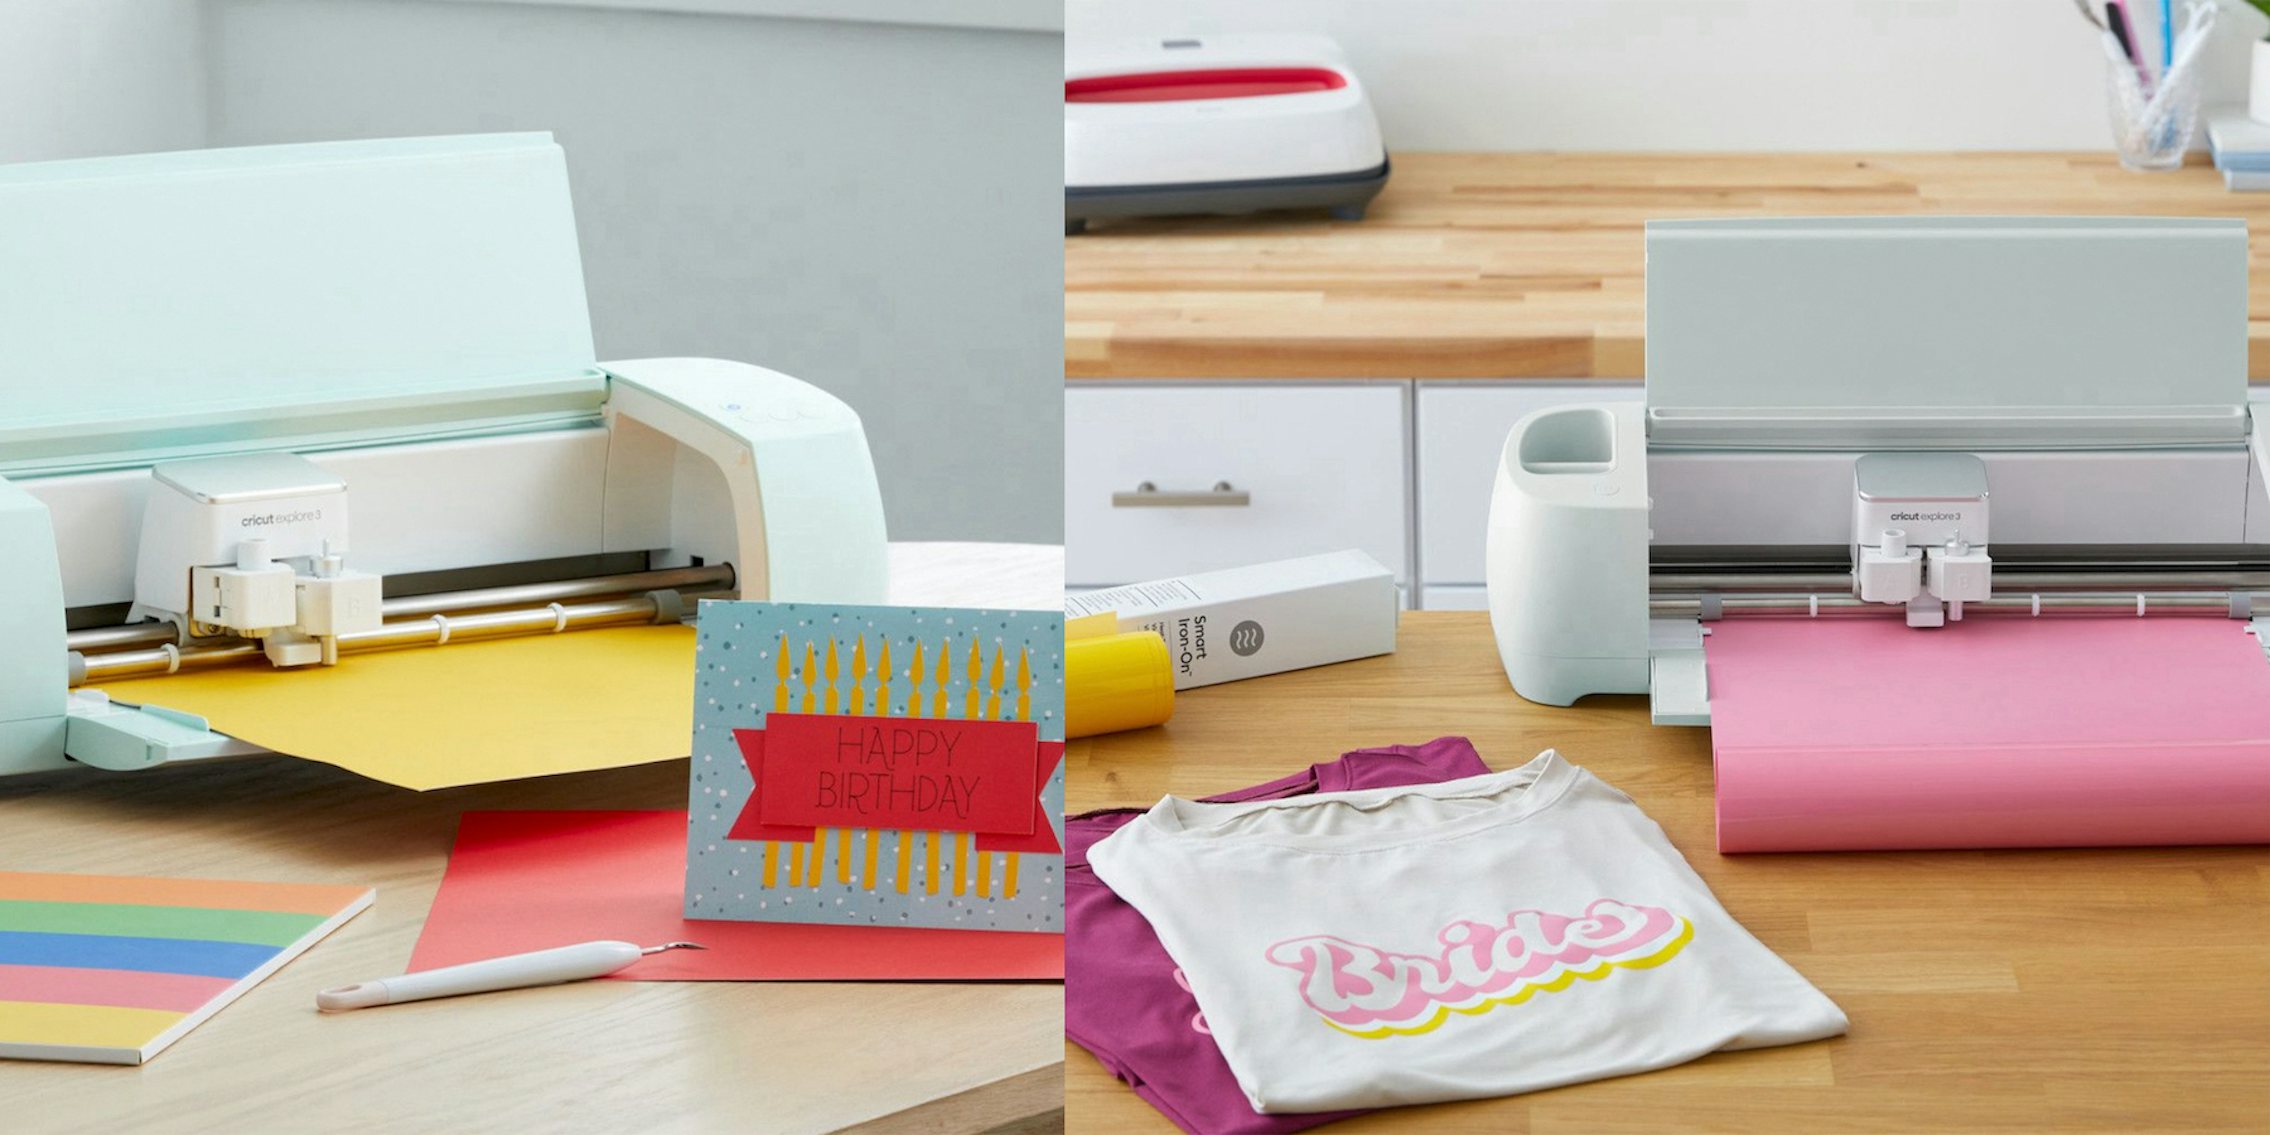 What is a Cricut Machine, Anyway?